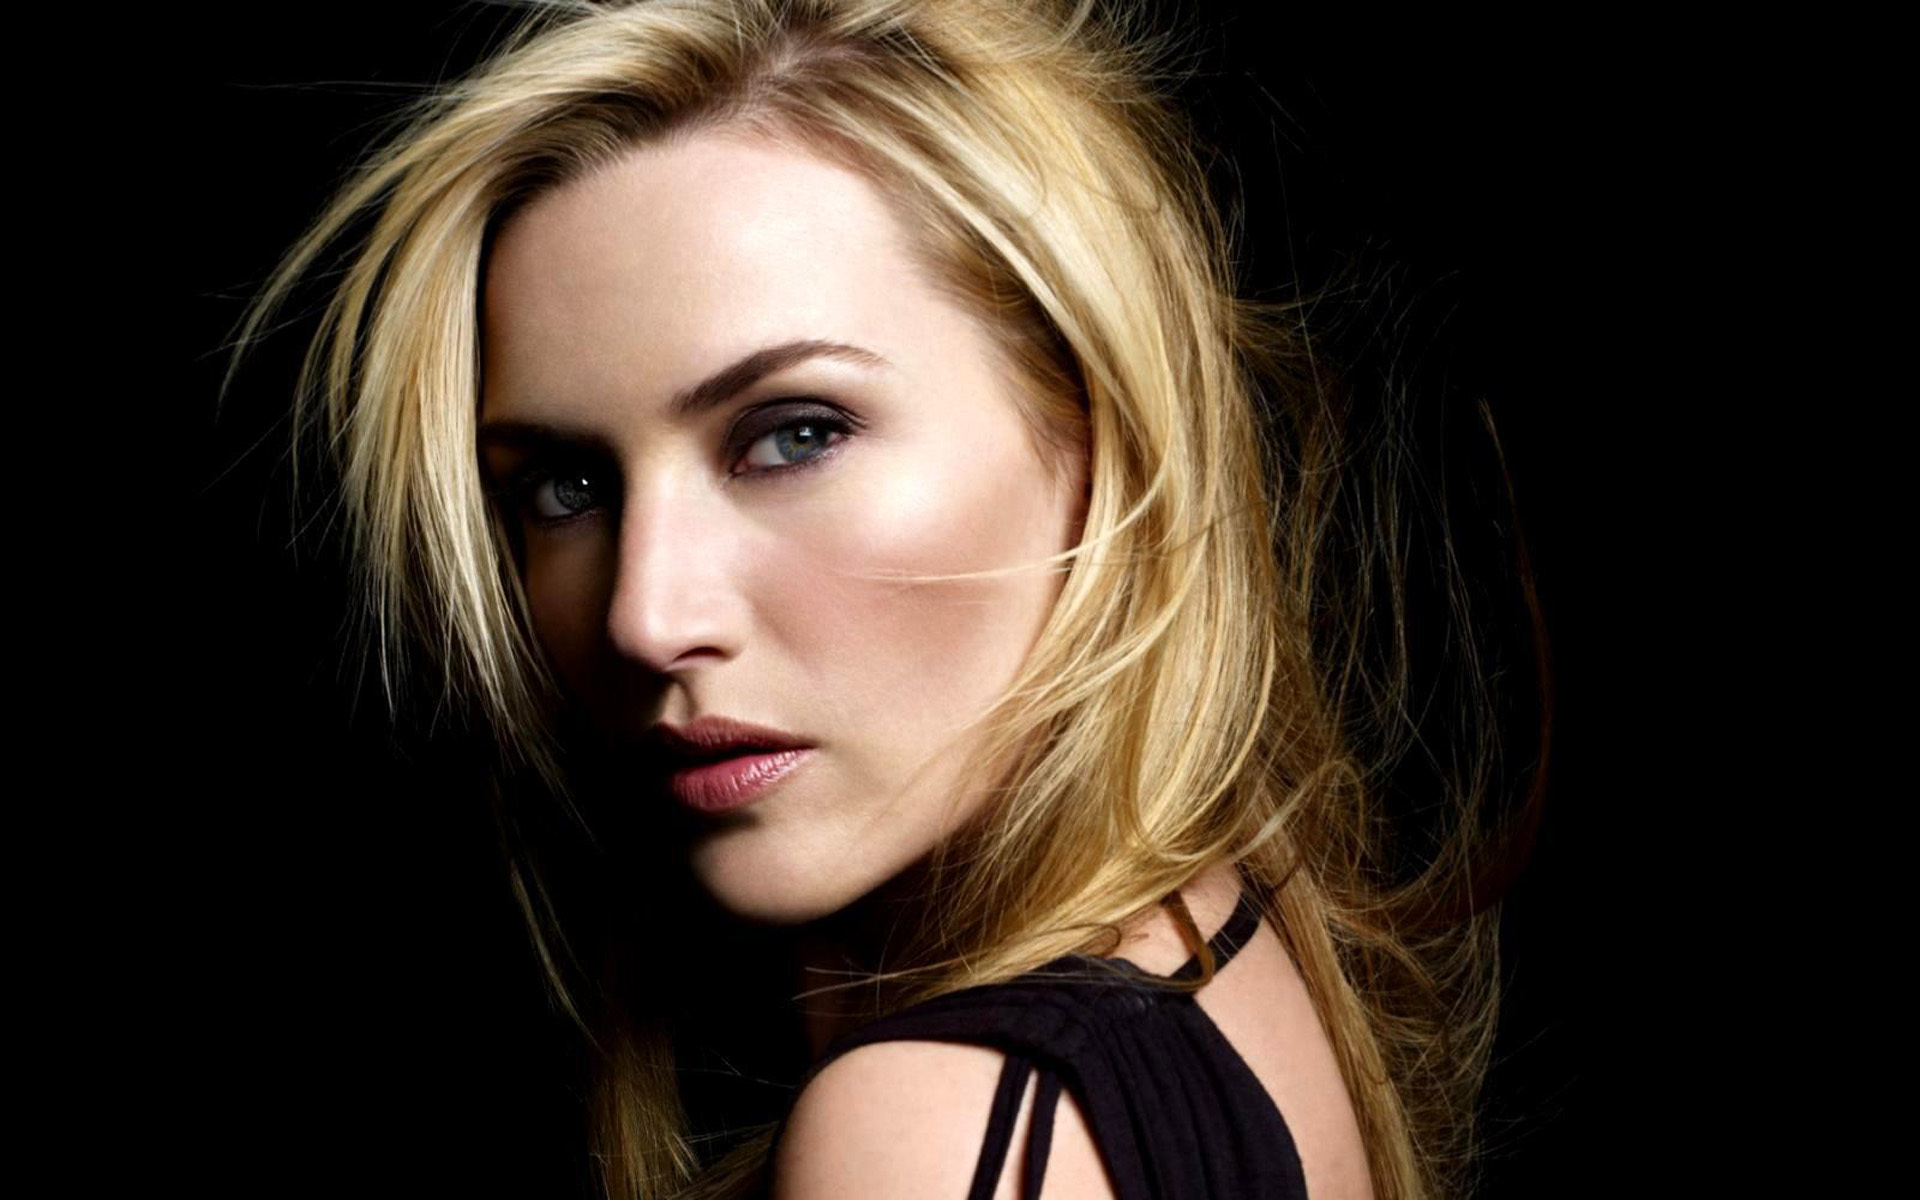 Kate Winslet New Photos Wallpaper Hd Celebrities 4k Wallpapers Images ...